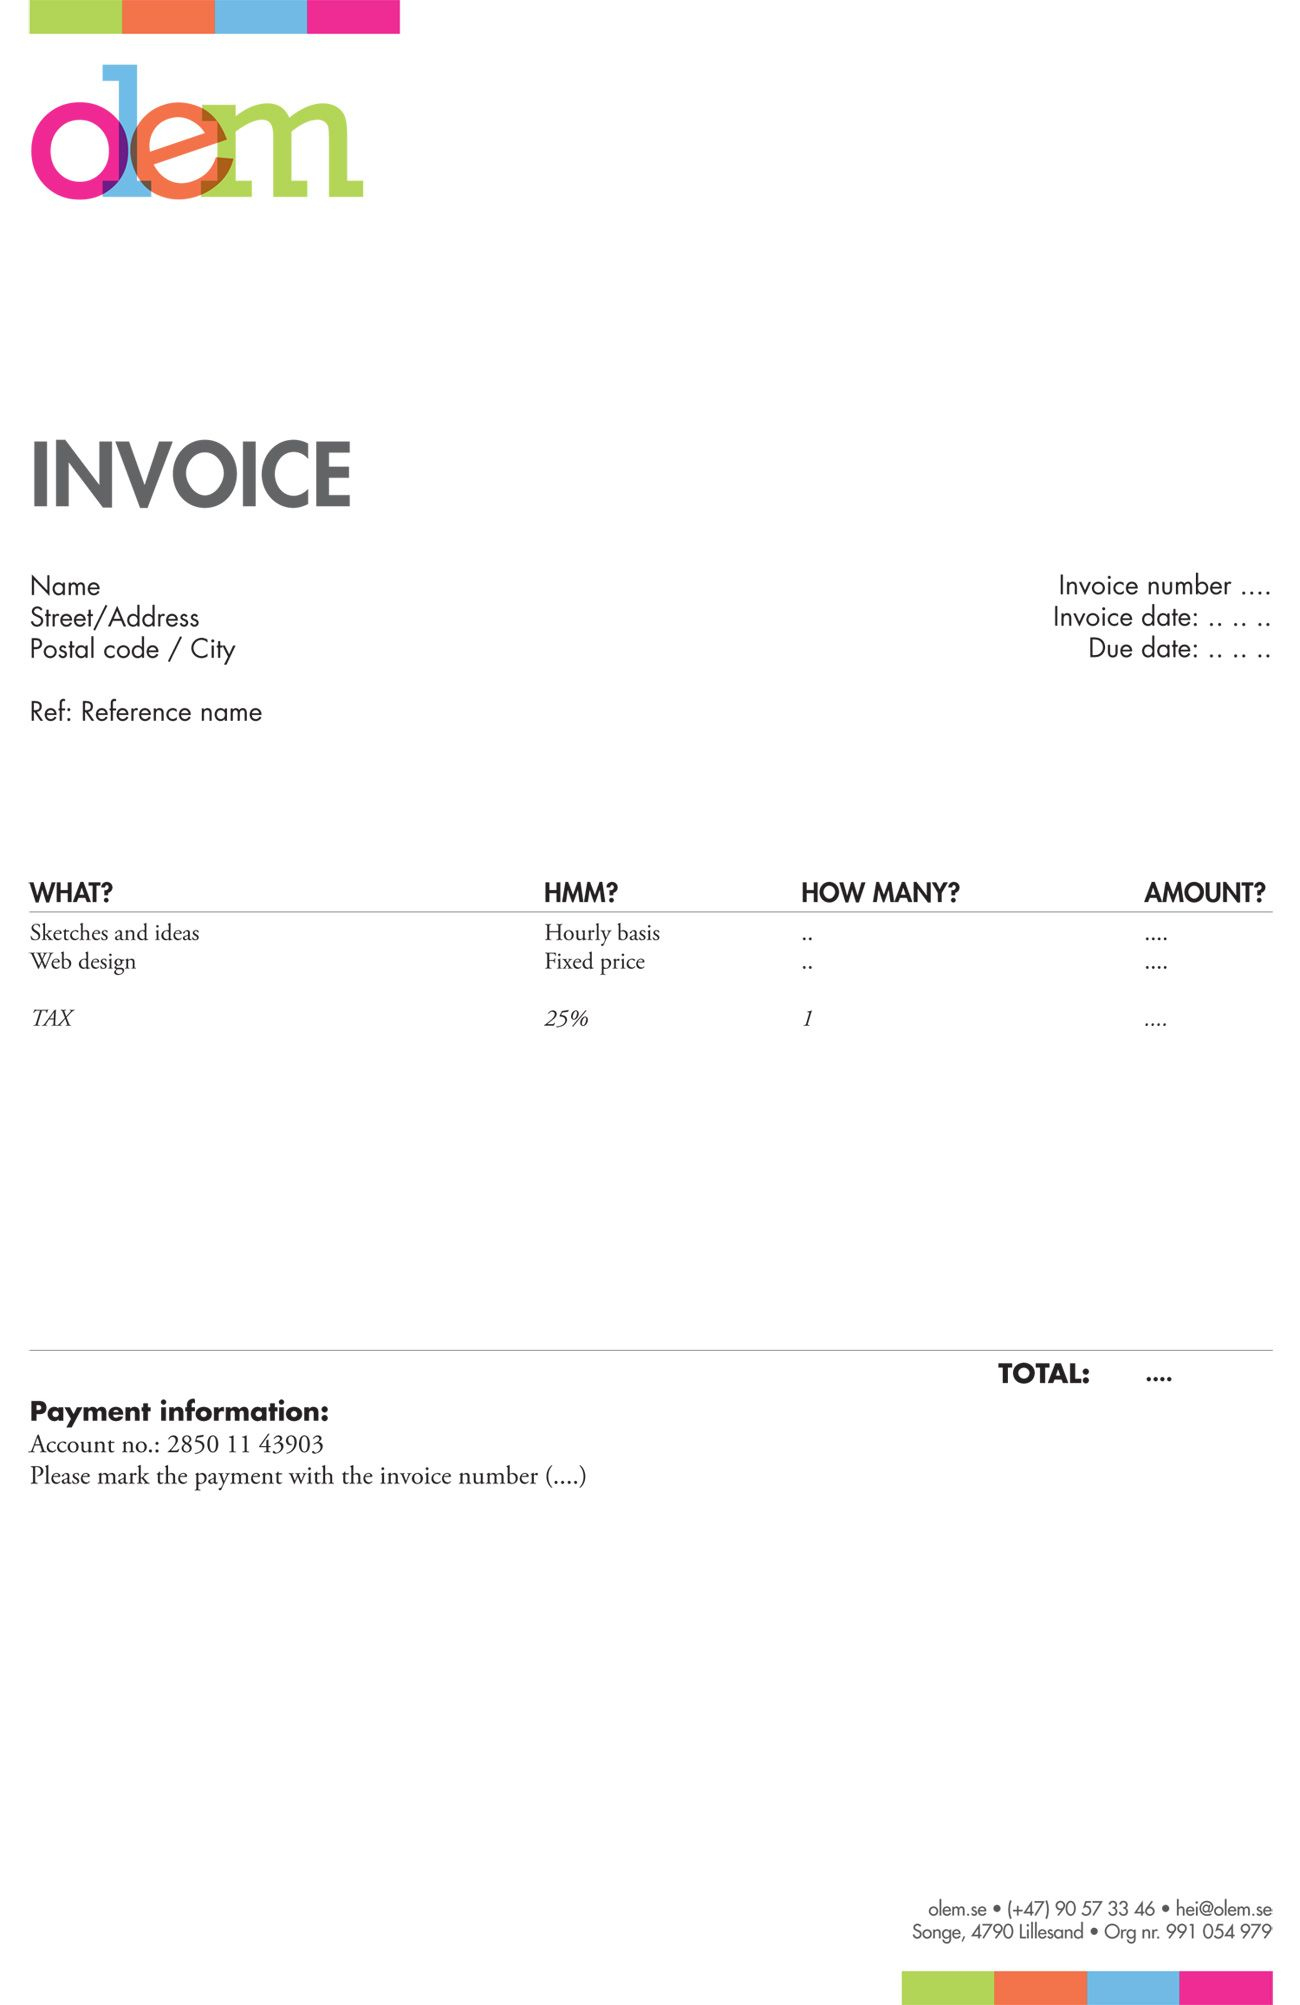 Invoice Like A Pro: Design Examples And Best Practices inside Invoice Template For Graphic Designer Freelance